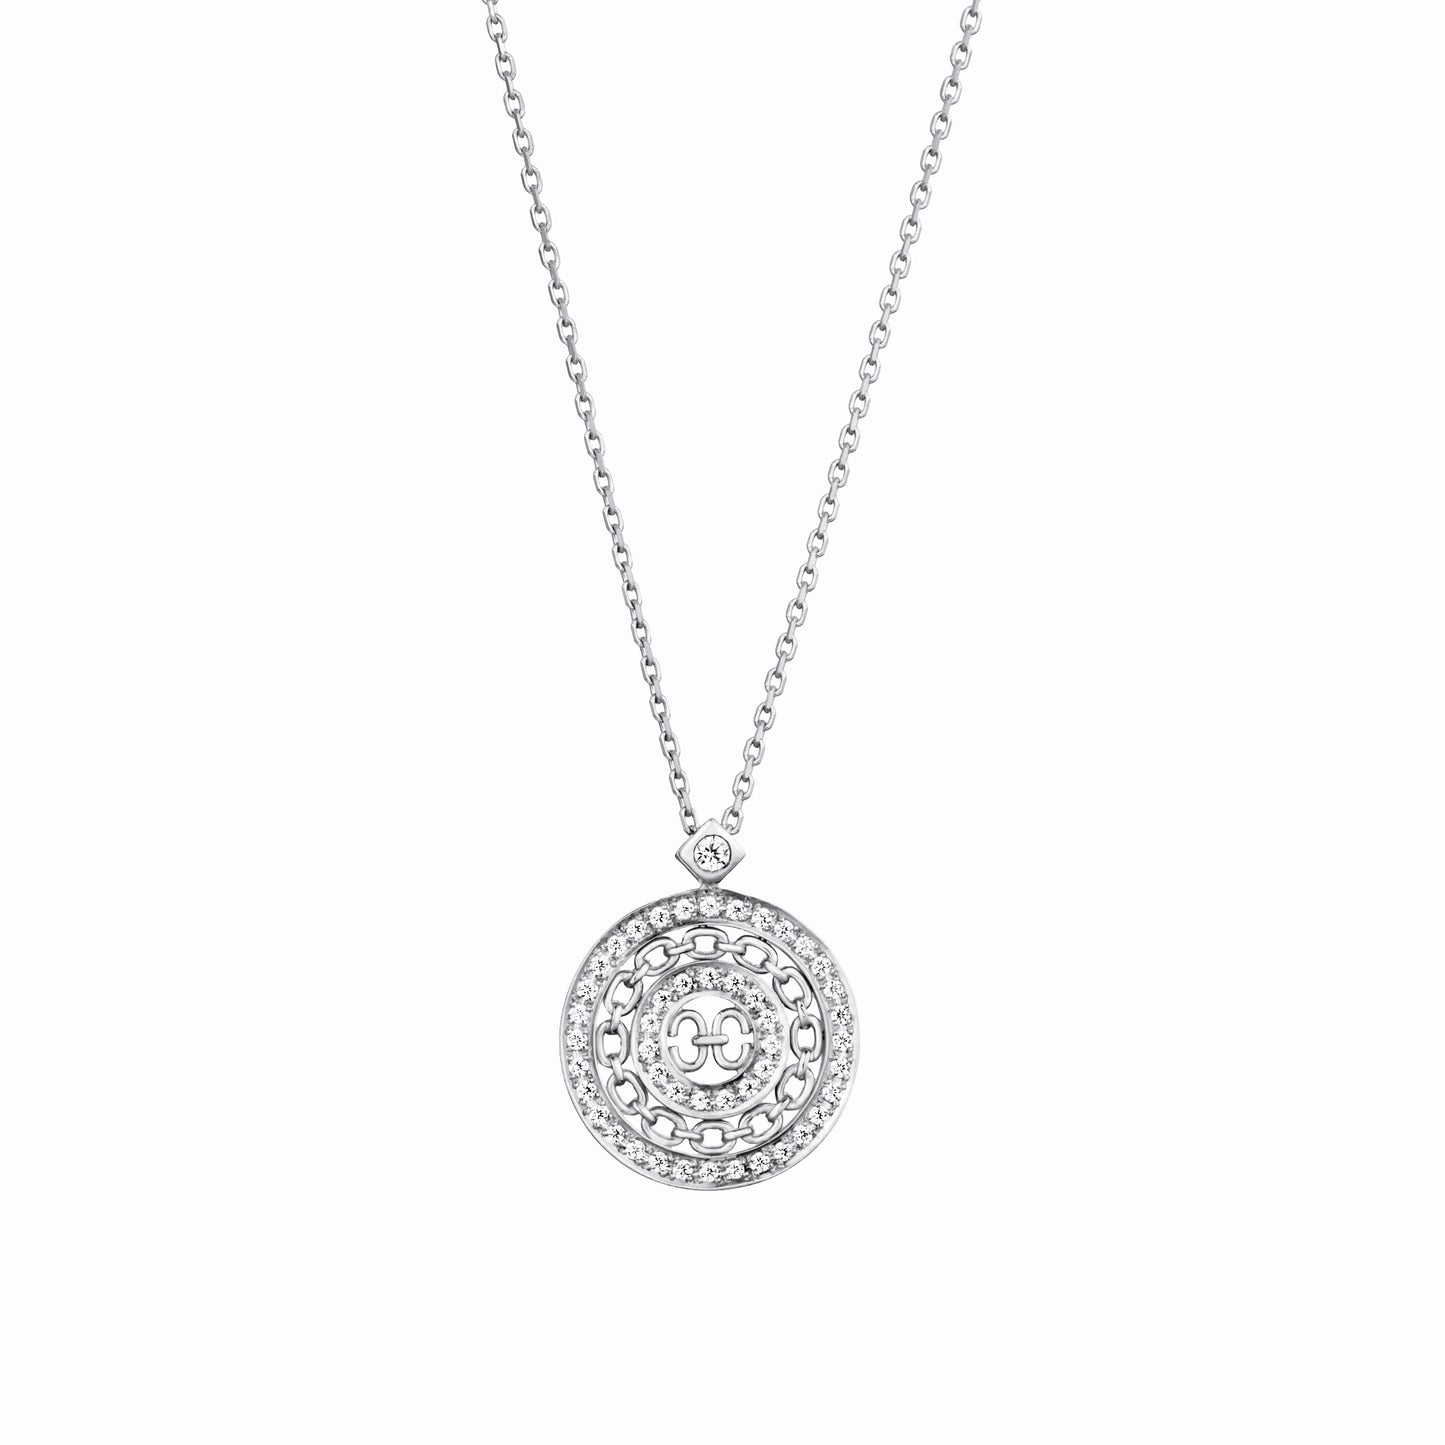 Links Timeless White Gold Necklace